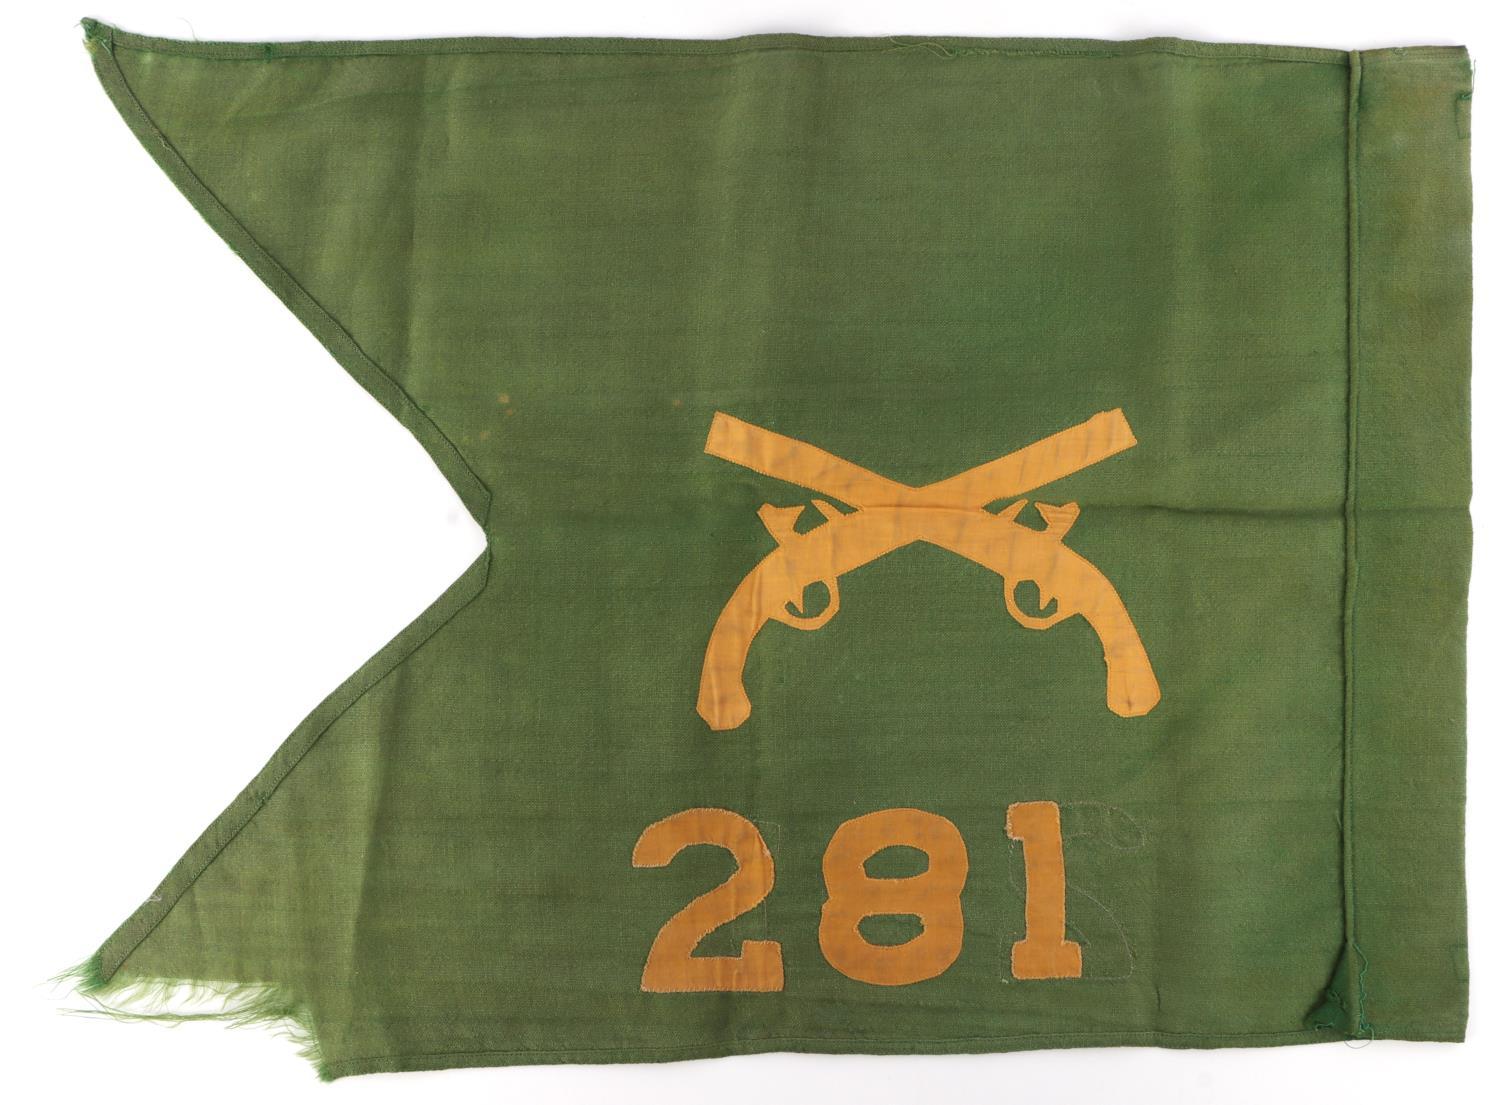 WWII US 281ST MILITARY POLICE GUIDON & HISTORY LTR